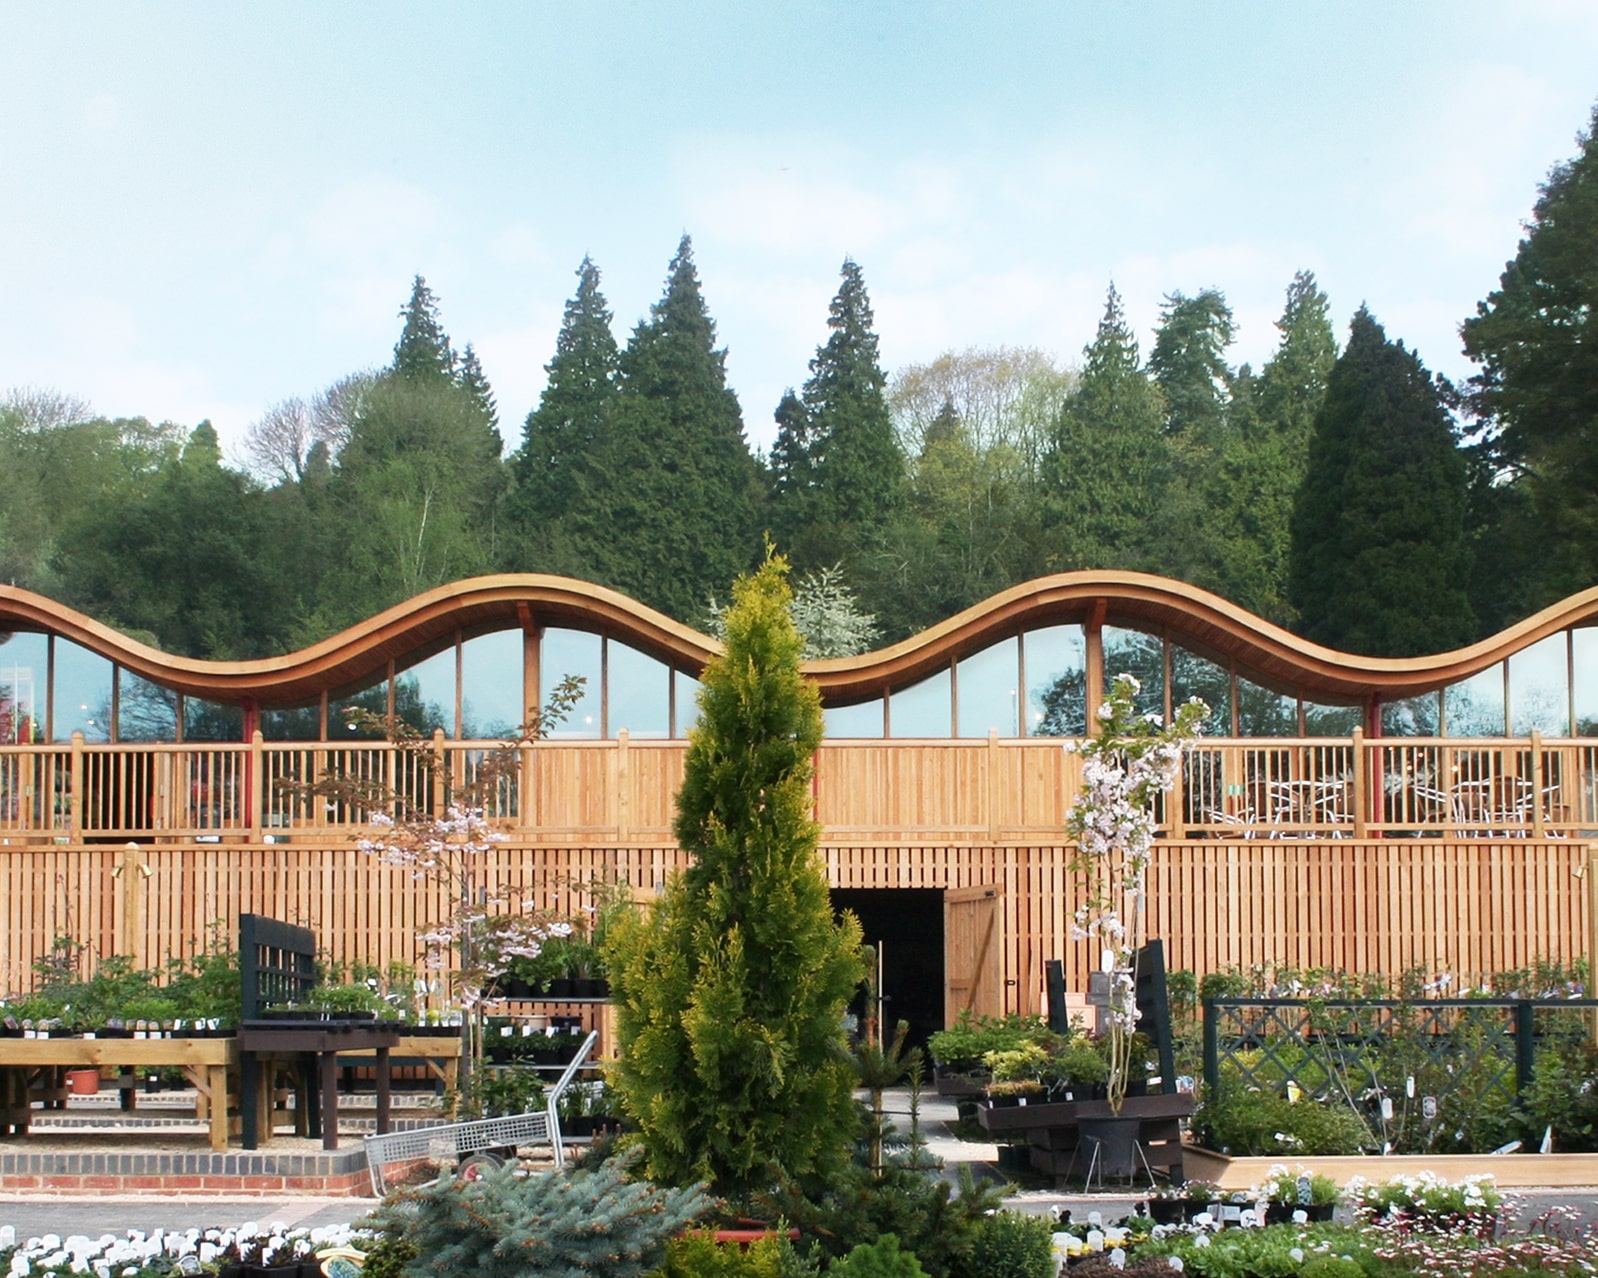 Roof of the Batsford Arboretum visitors' center waterproofed with the Elevate RubberGard EPDM membrane